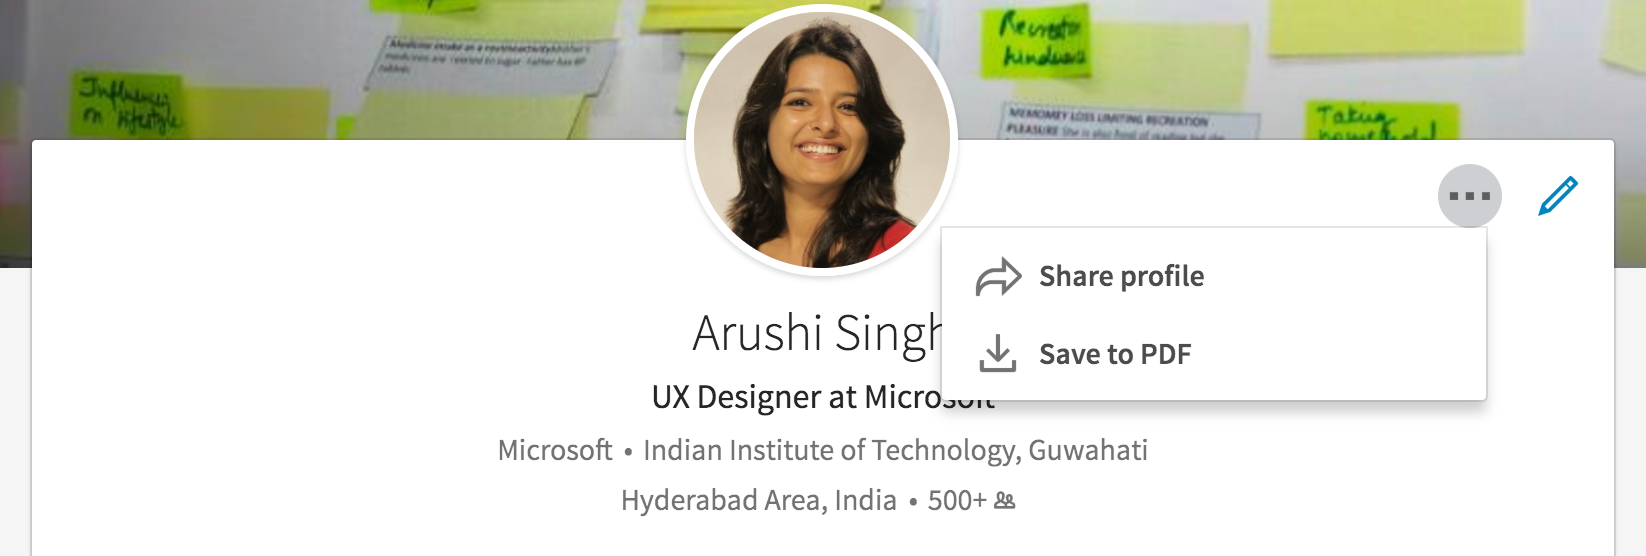 Can we make Splitwise a bit “wiser”?, by Arushi Singh